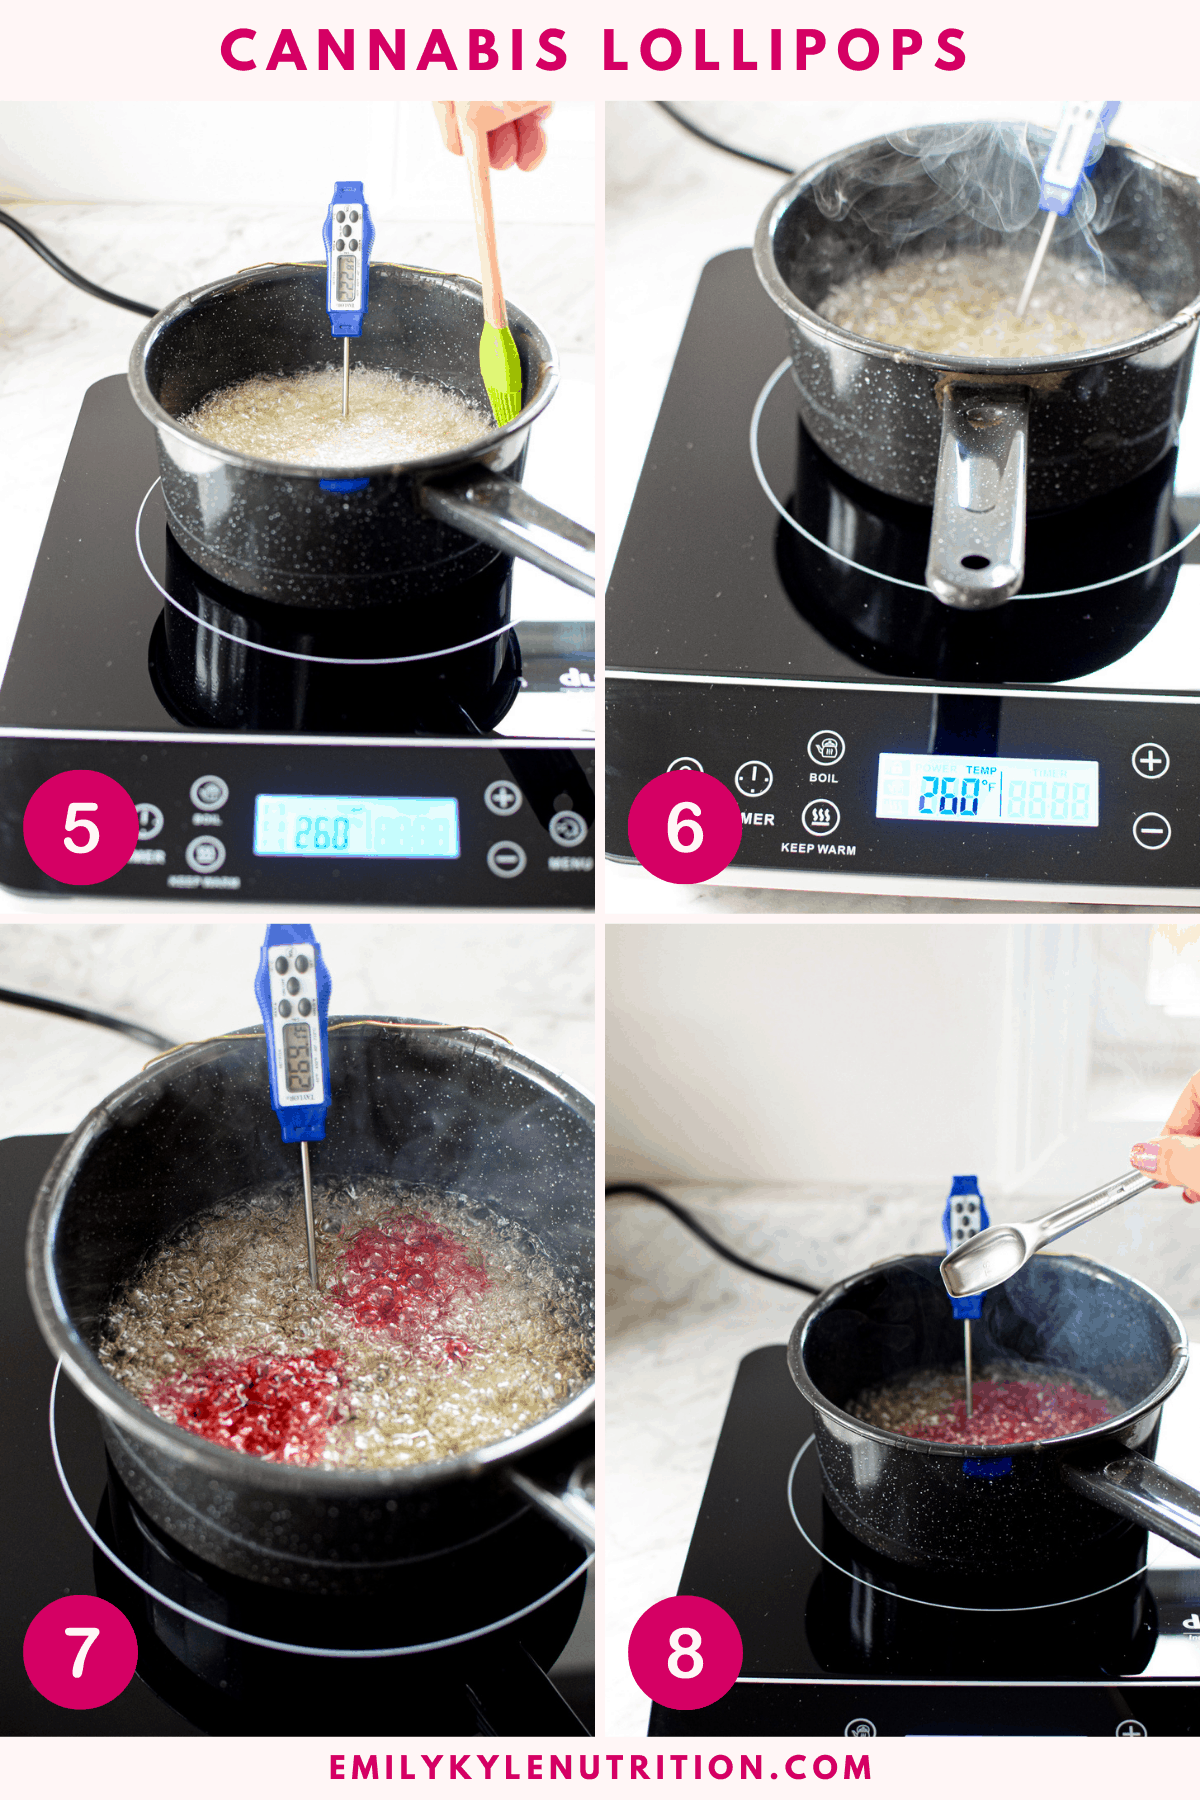 A 4 step collage showing steps 5-8 for making cannabis lollipops - 1 - bringing to a boil, 2 checking the temperature, 3 adding the food coloring, 4 adding the flavoring